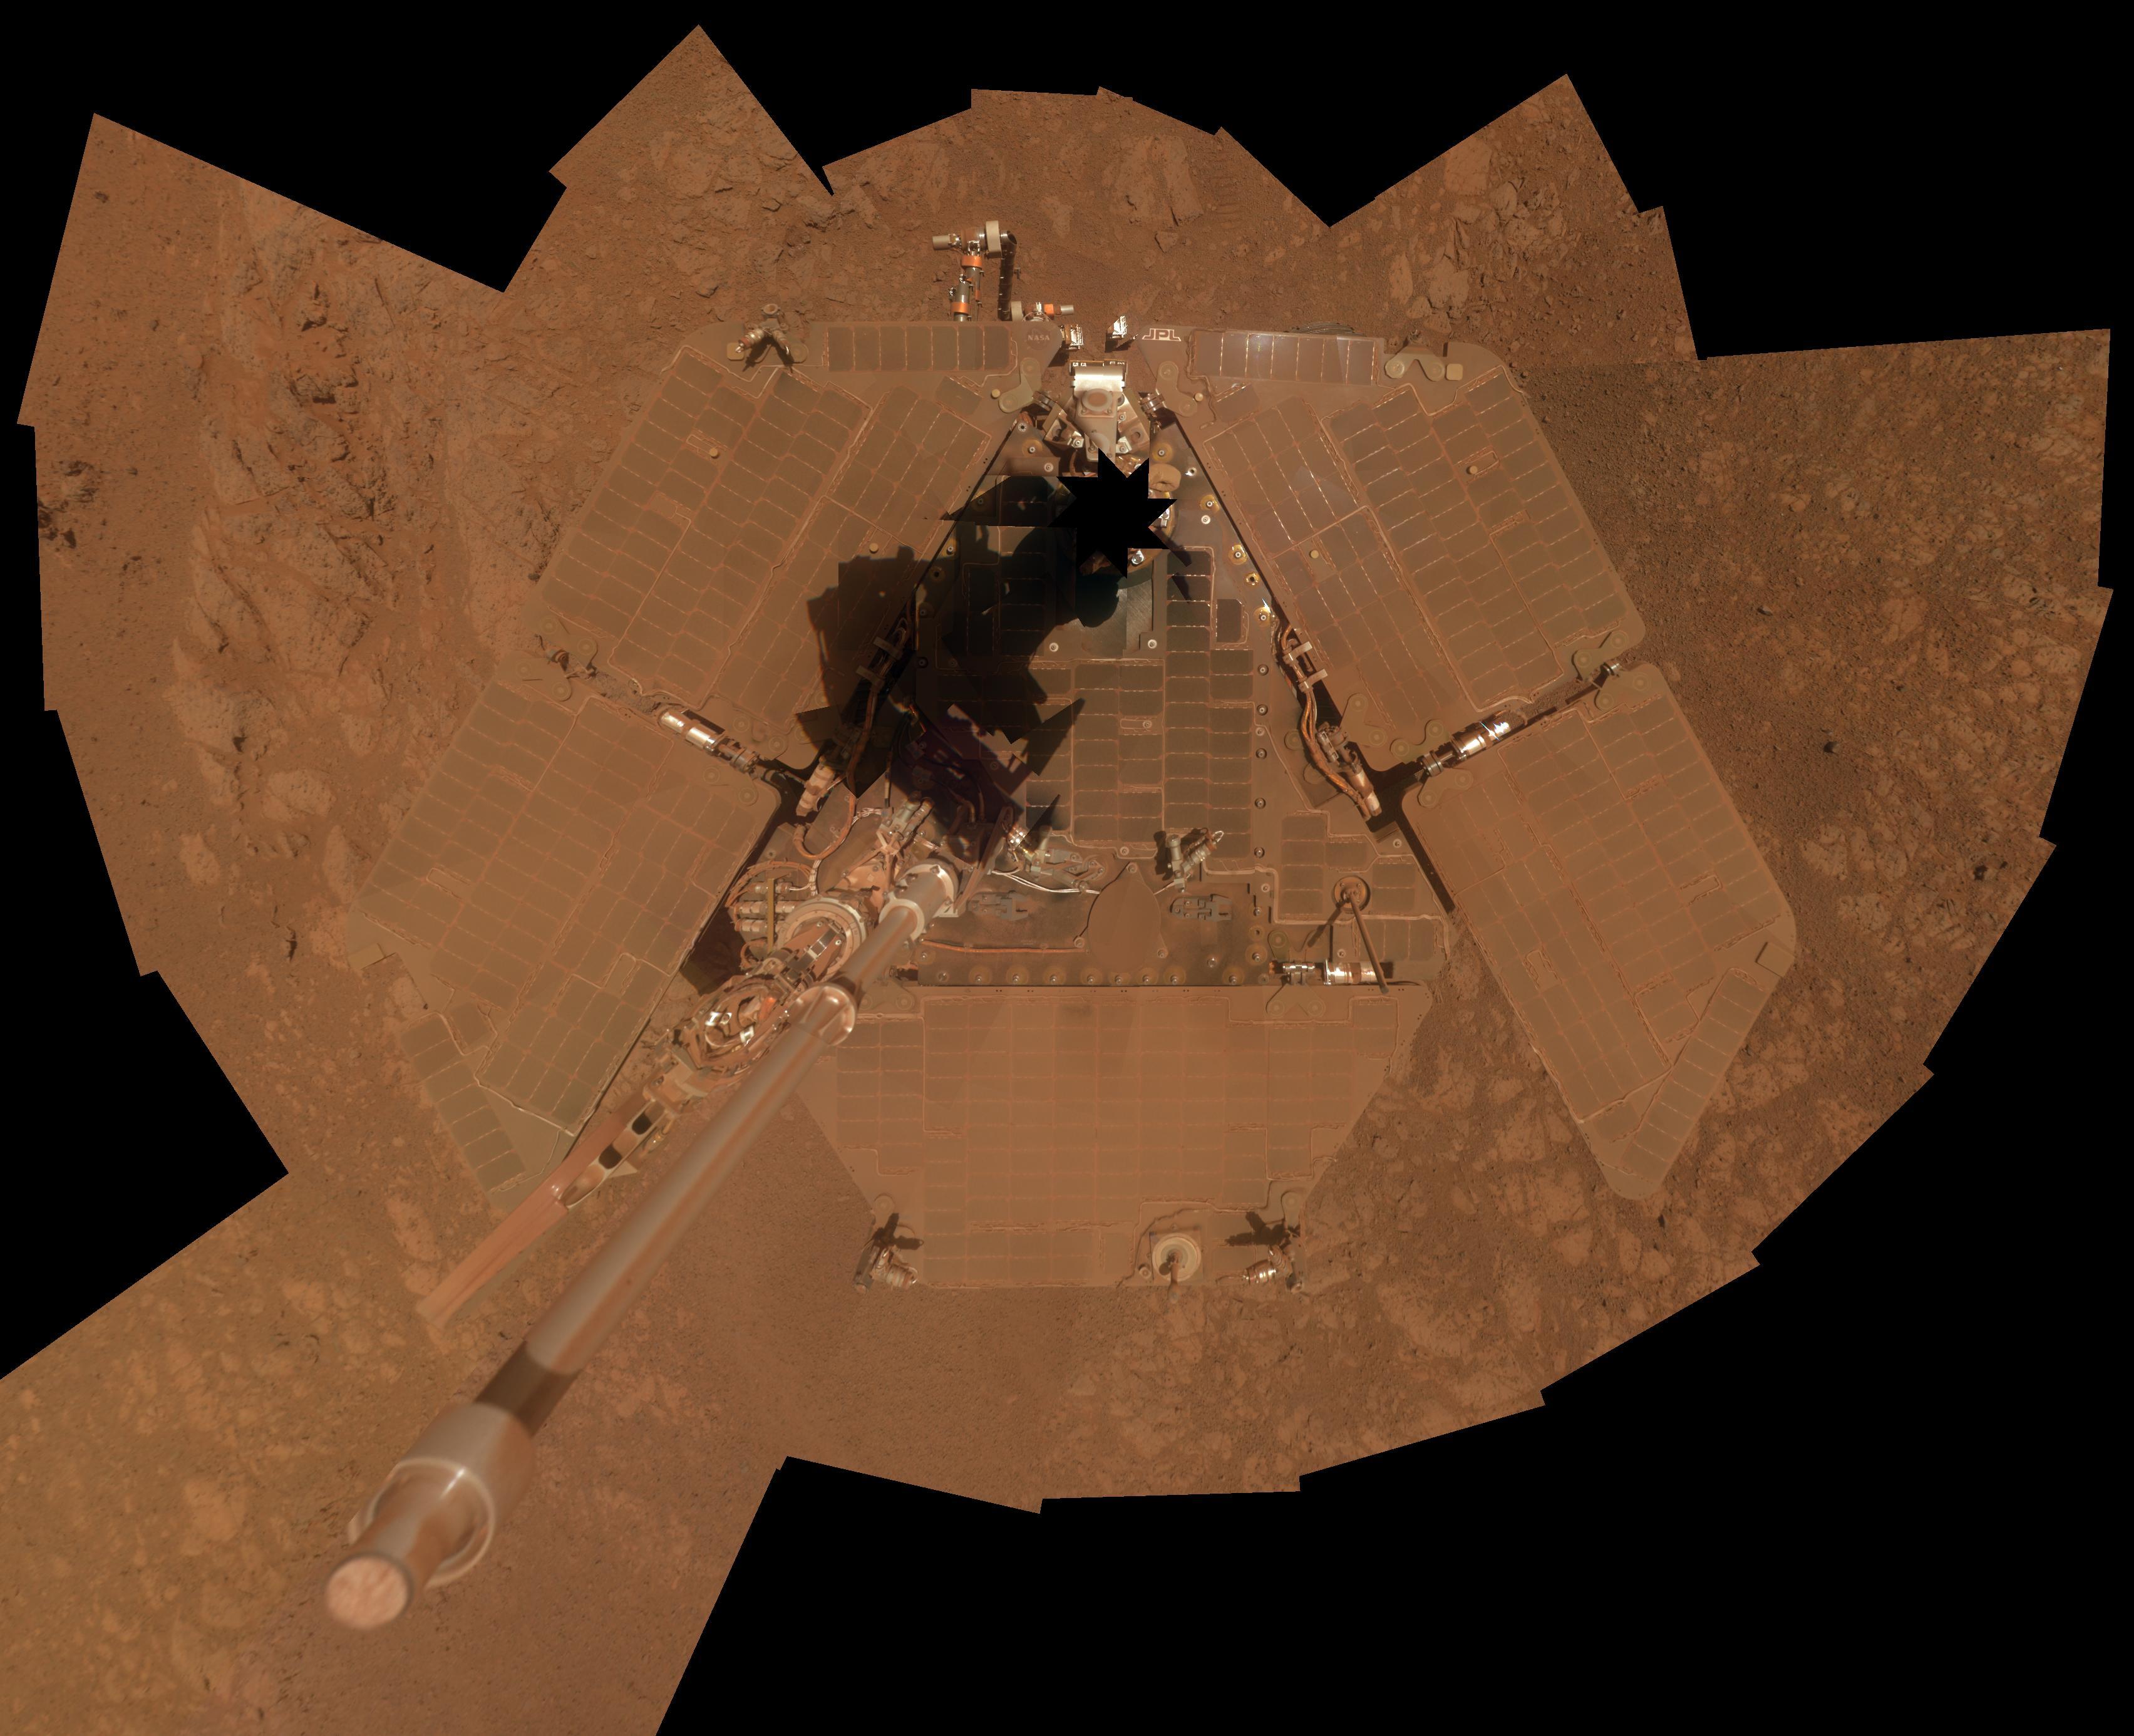 opportunity-10-anos